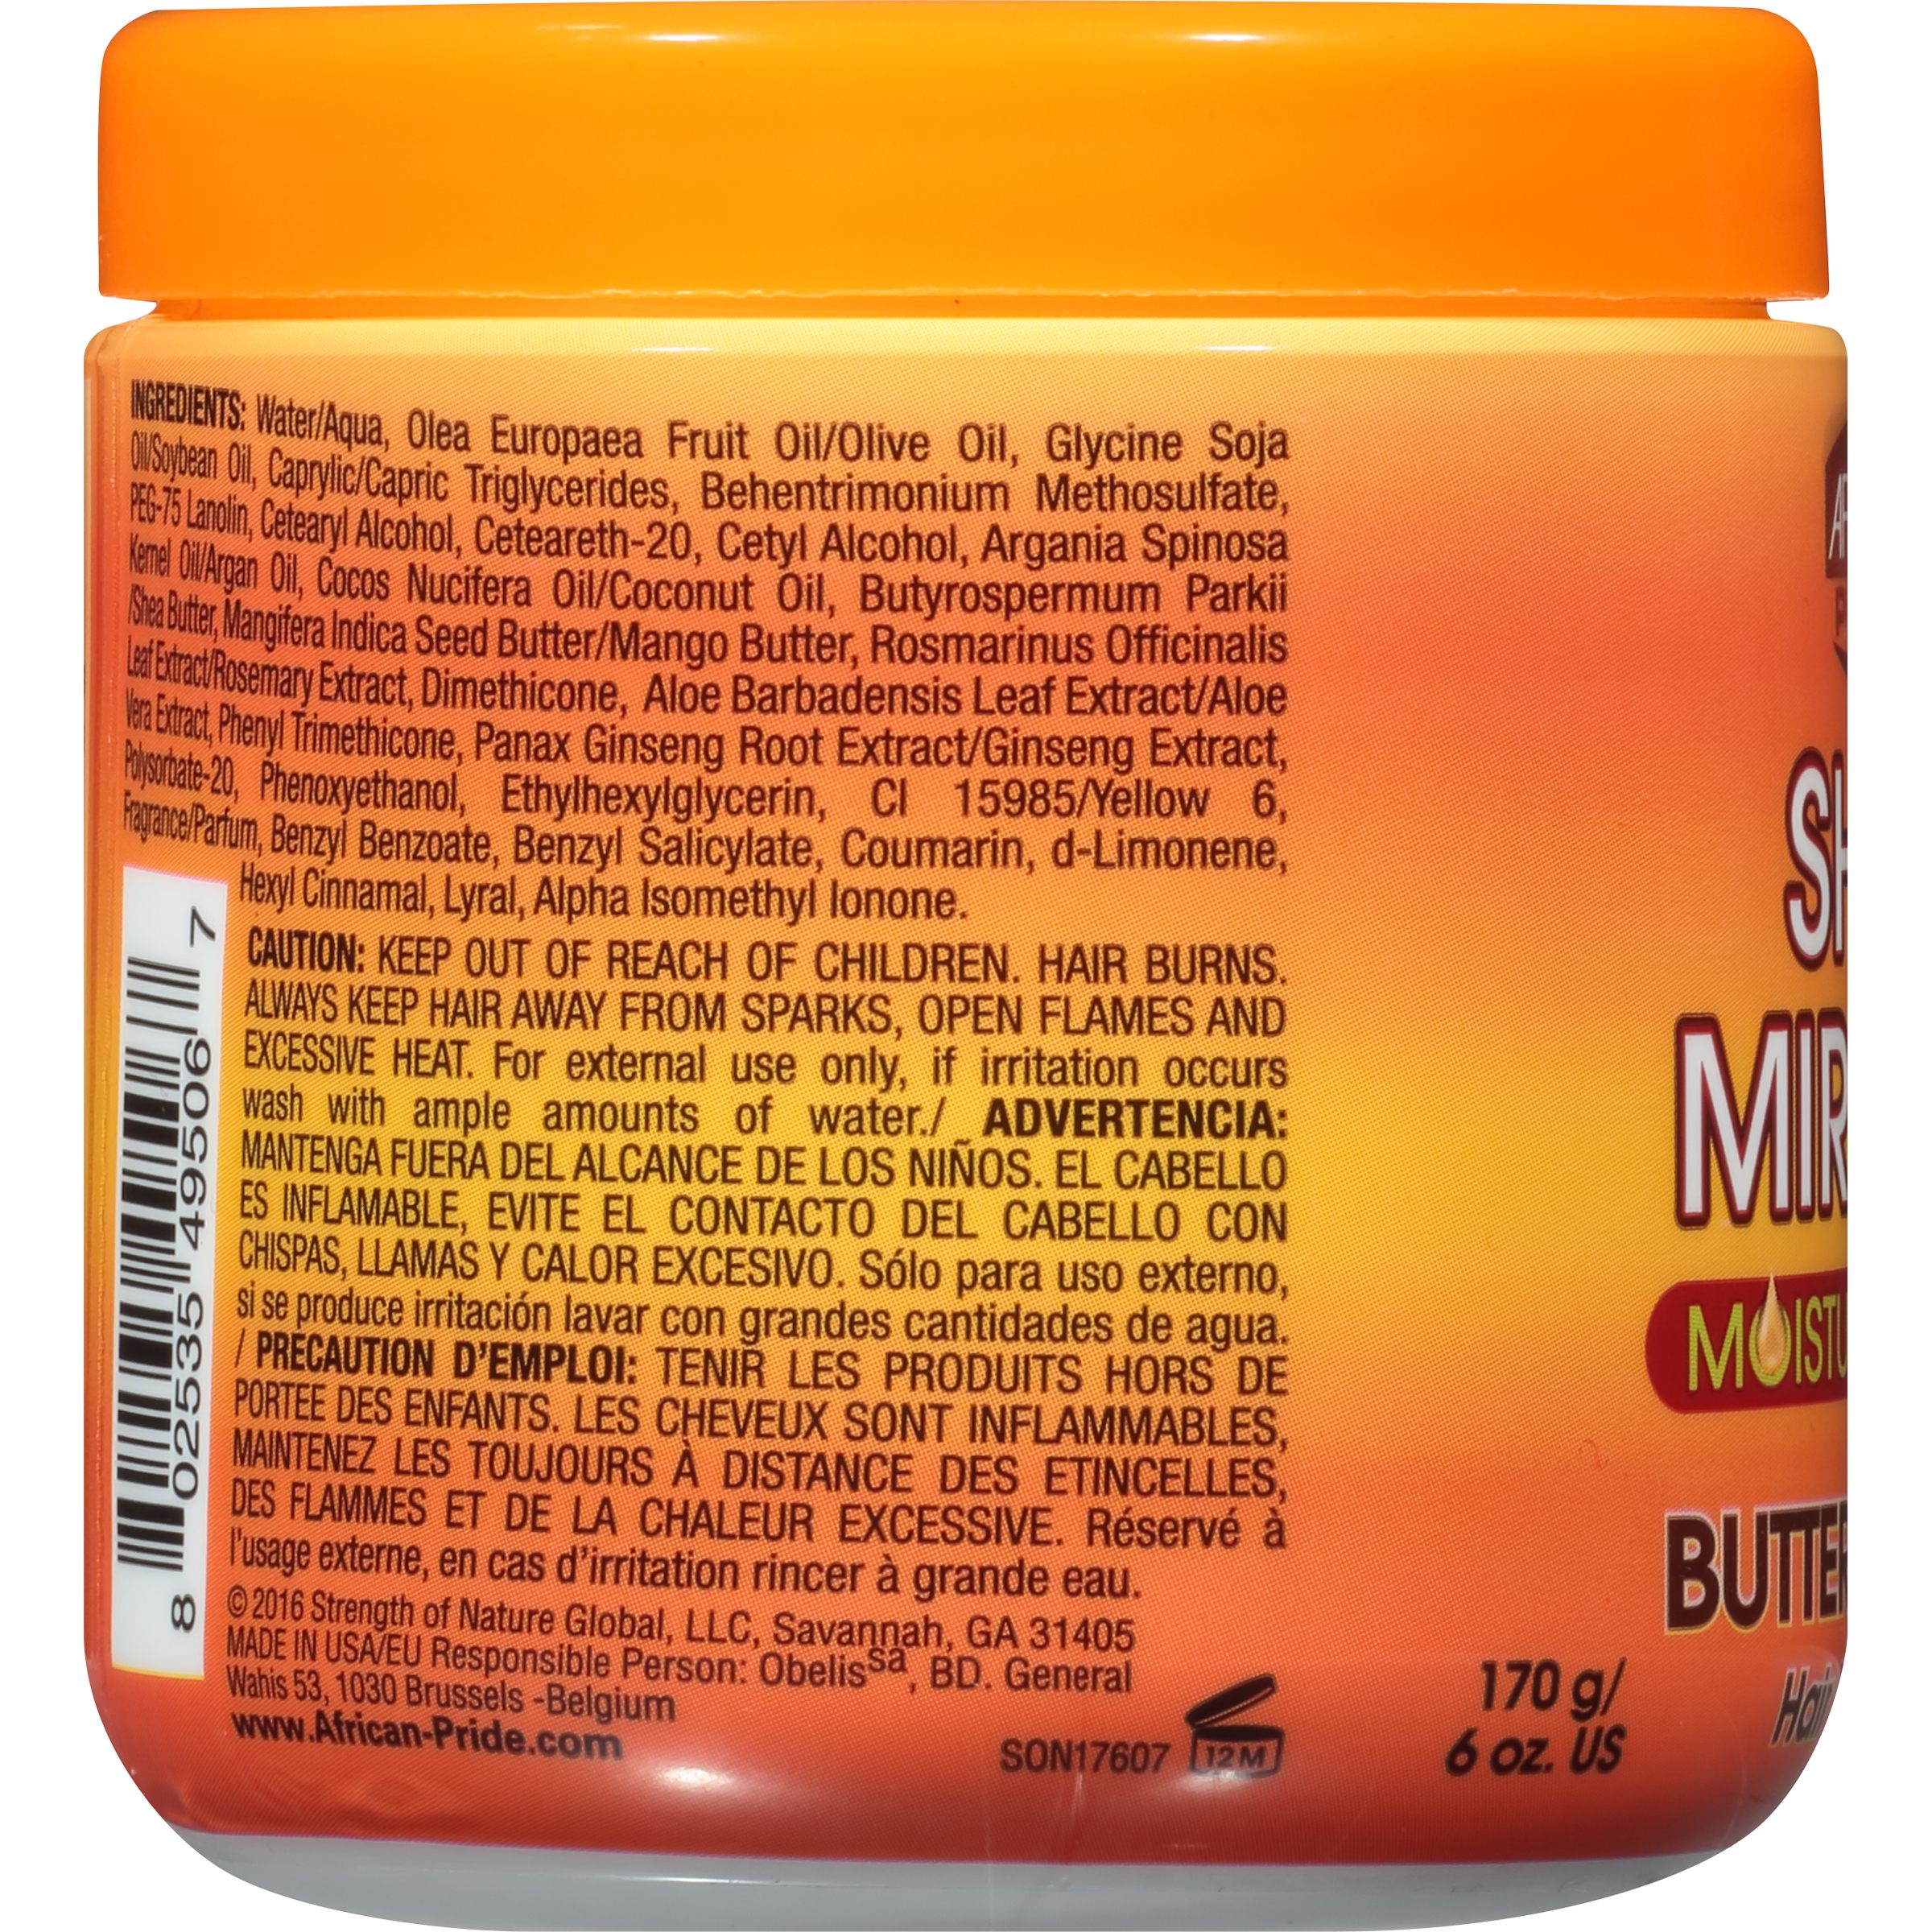 African Pride Shea Miracle Moisture Intense Buttery Leave In Cream Hair Moisturizer for Wavy, Curly, Coily Hair with Shea Butter, 6 oz. - image 2 of 6